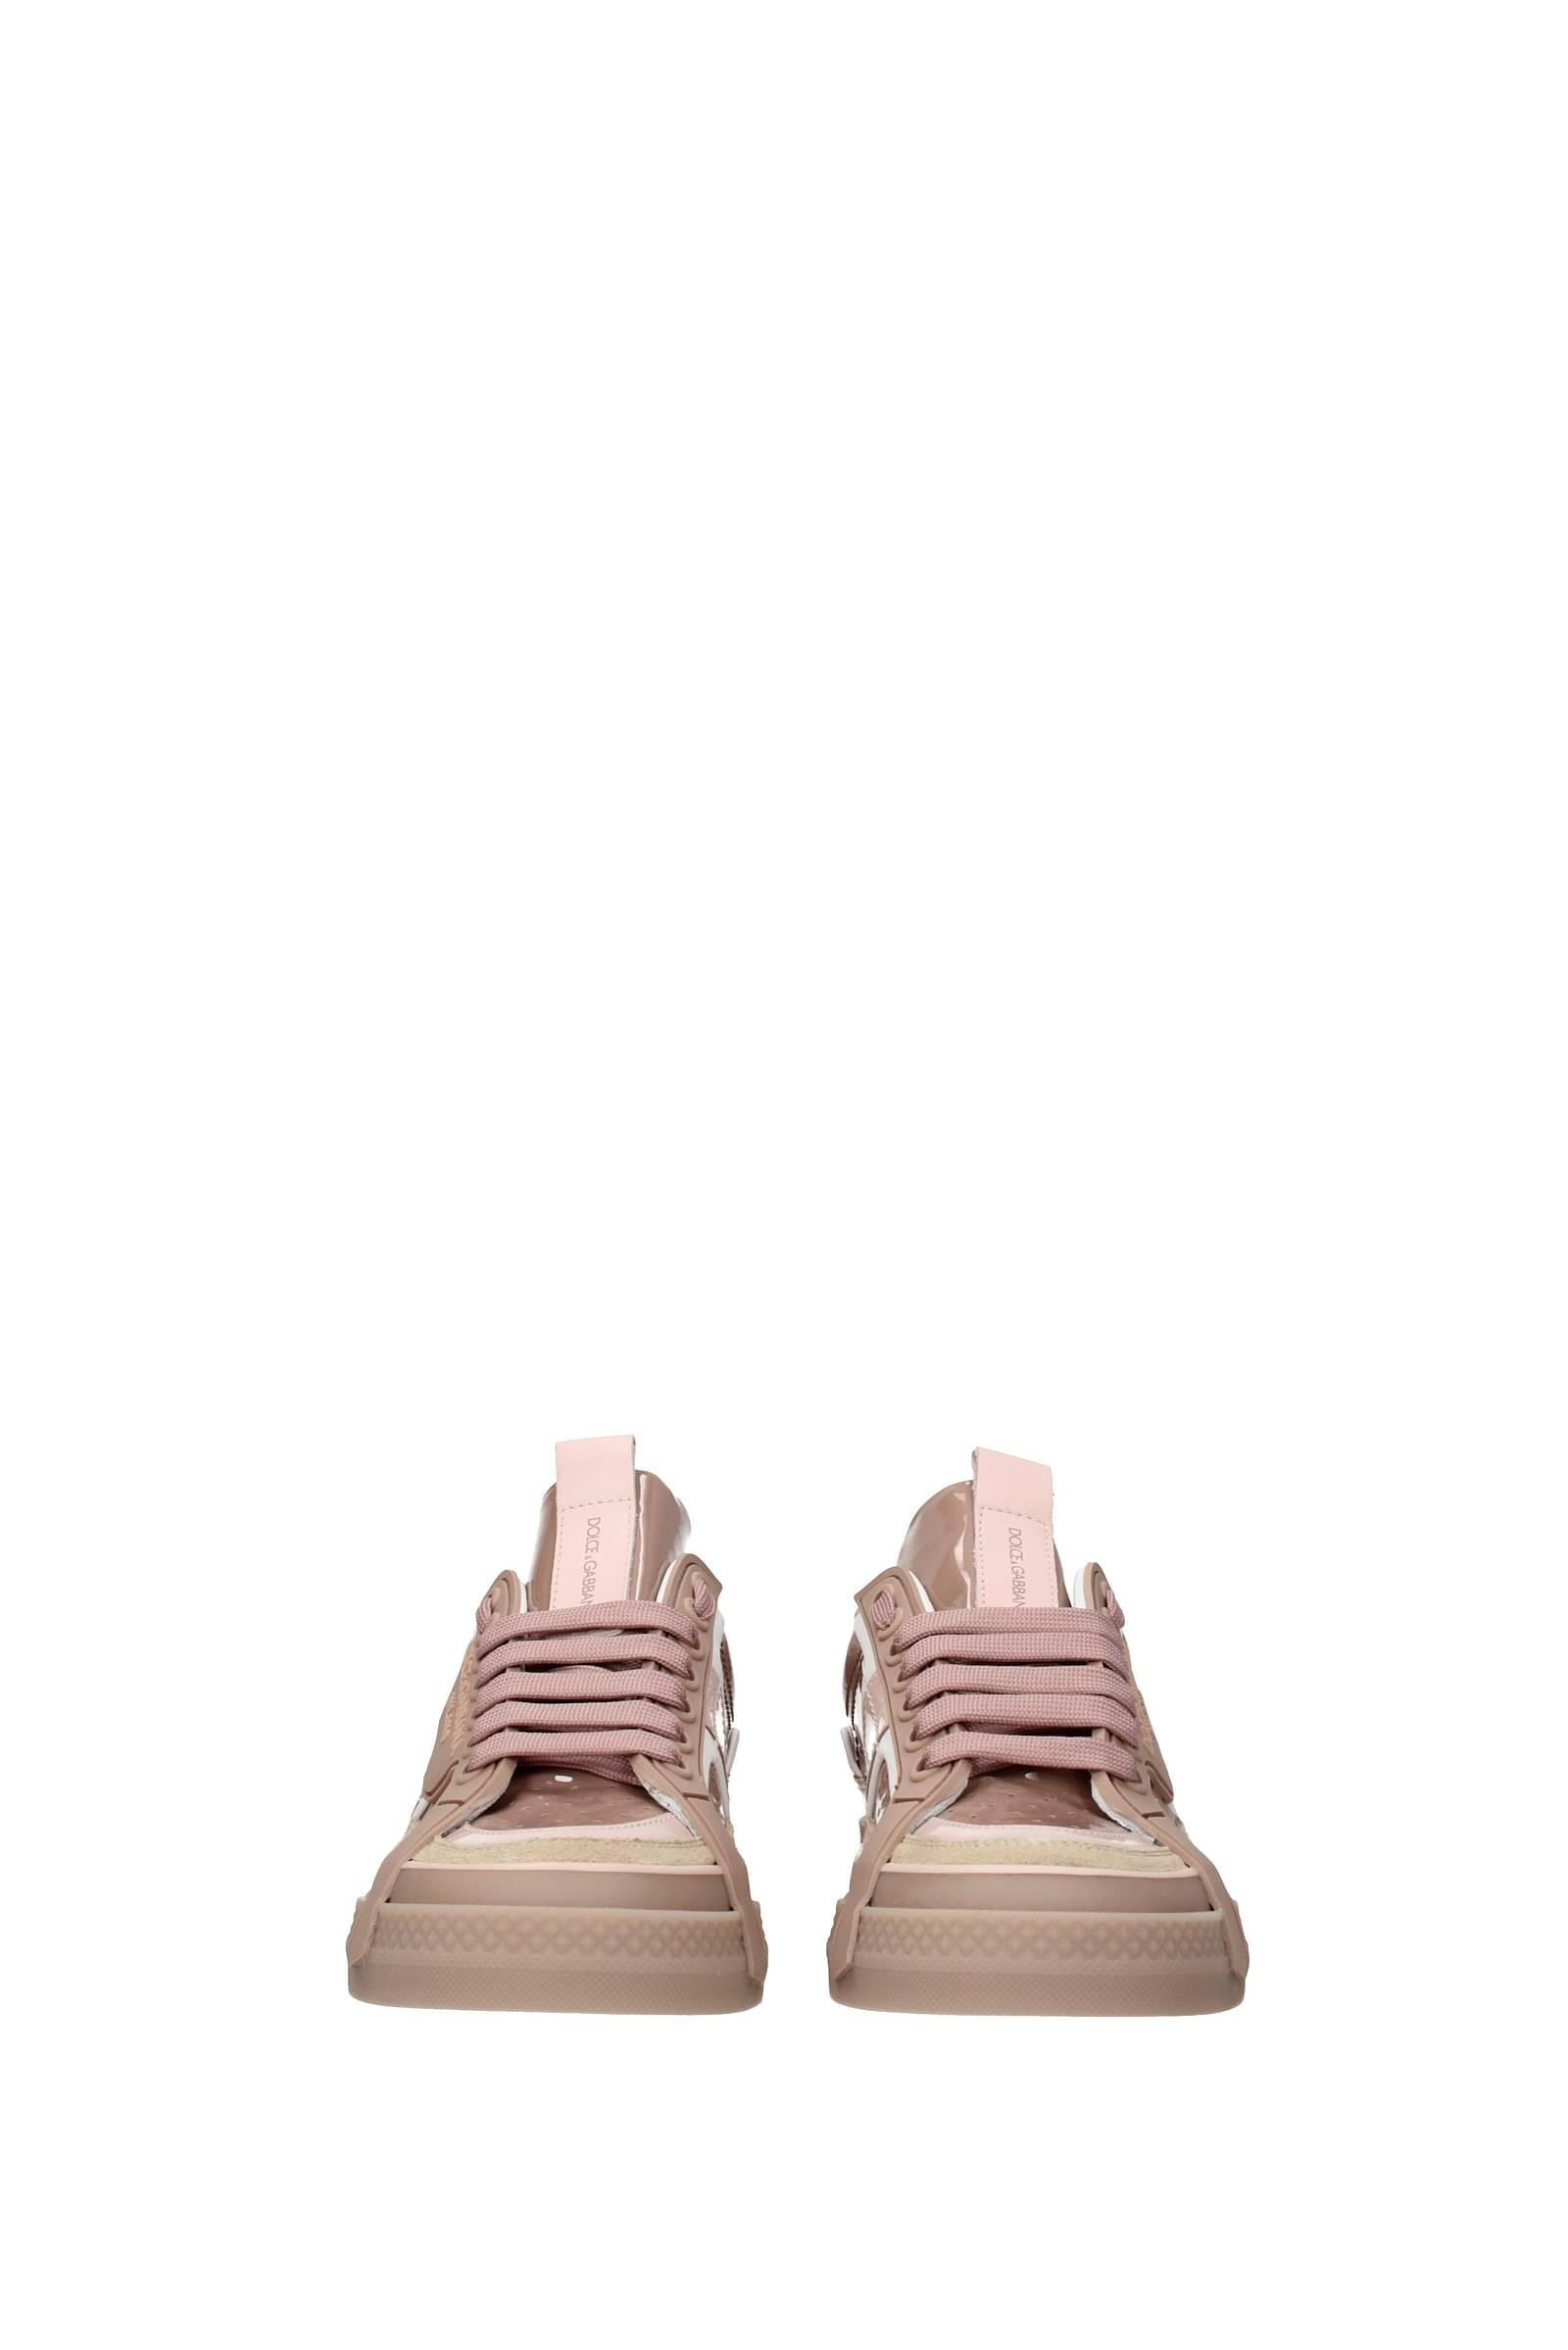 Dolce & Gabbana Sneakers Patent Leather Pink Nude Pink | Lyst